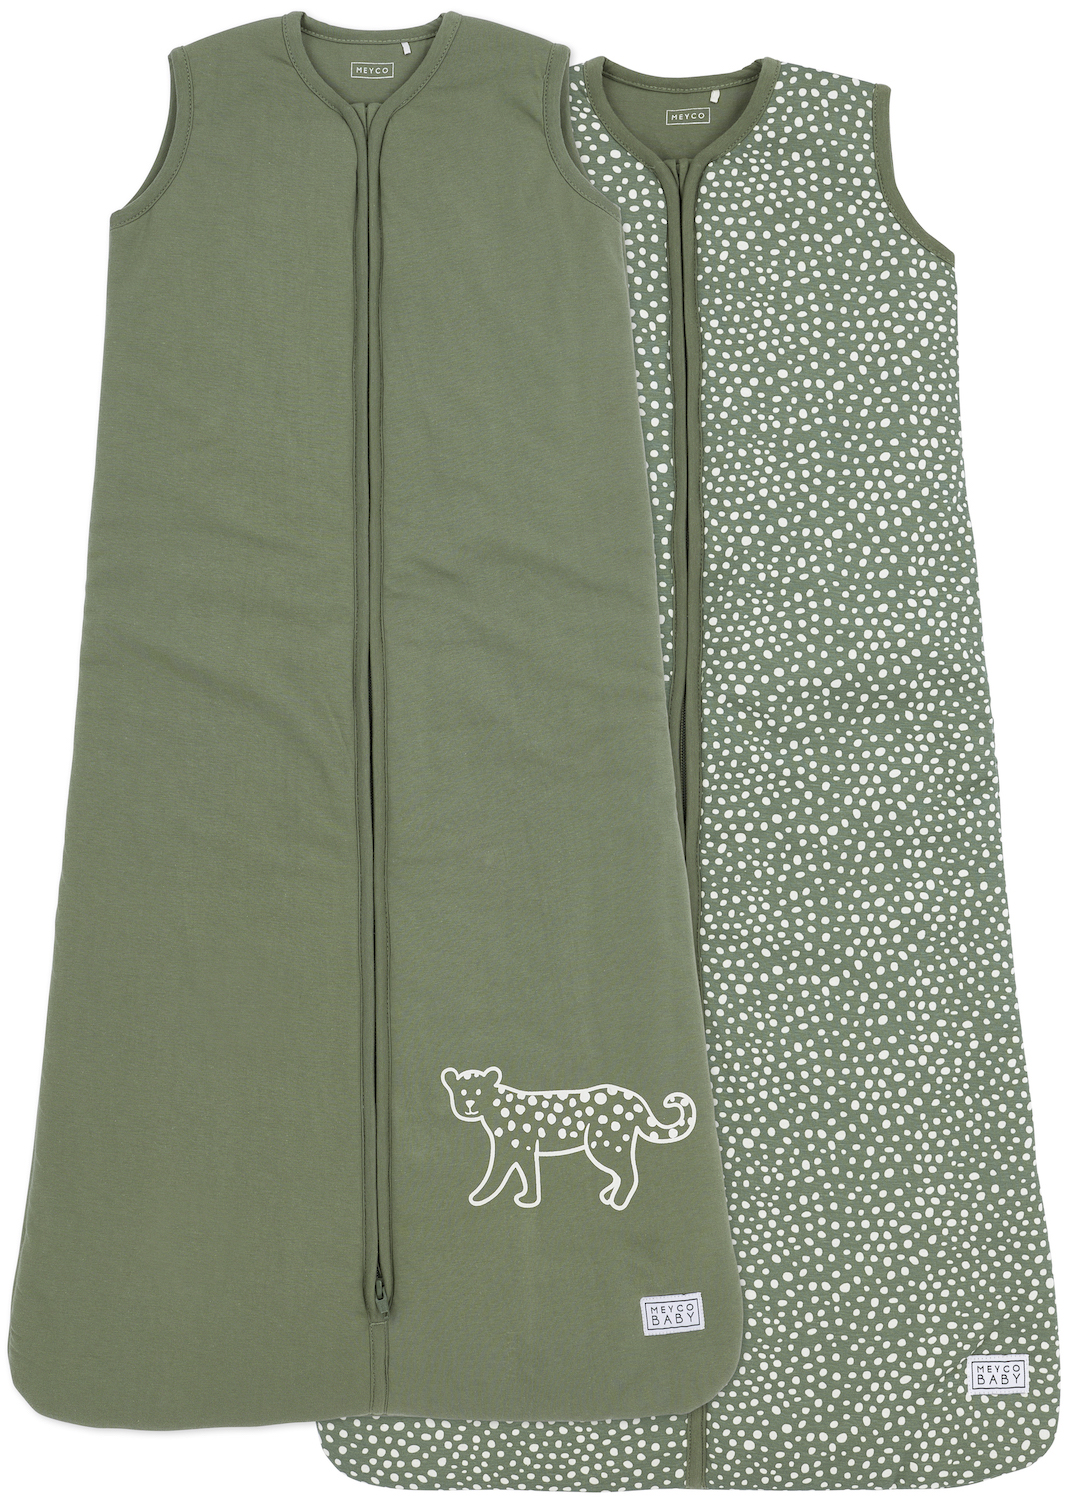 Baby sleeping bag lined 2-pack Cheetah – Forest Green – 70cm